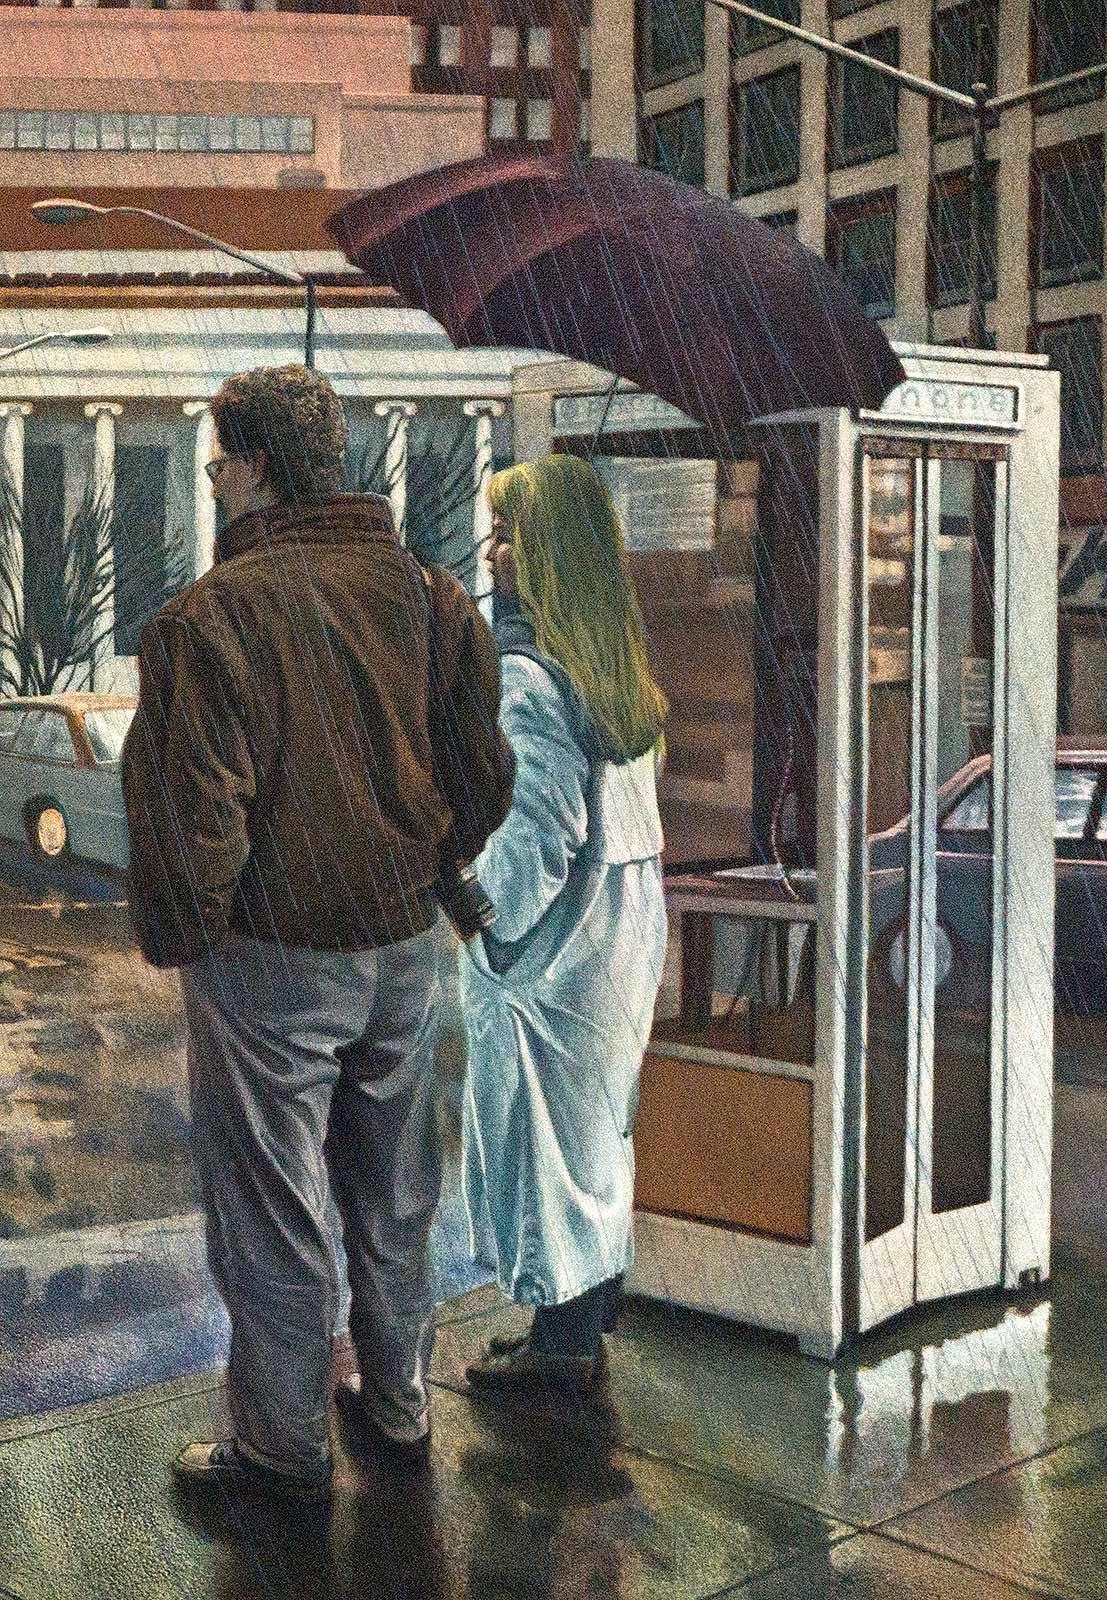 Steady Rain (Rain is falling on a street in Baltimore, MD and umbrellas are out) - Print by Art Werger